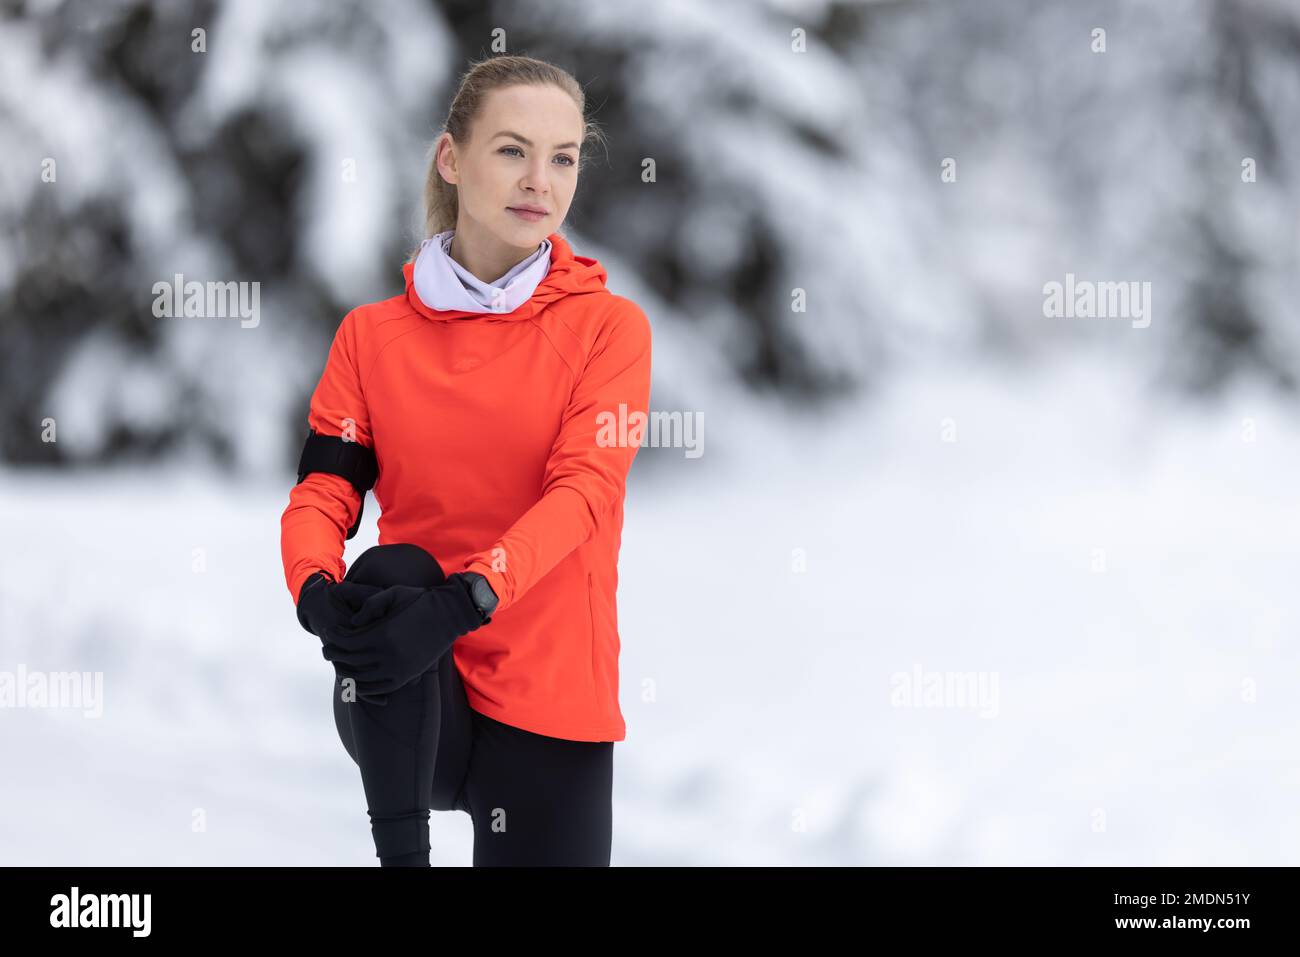 Athletic female runner doing stretching exercise, preparing for workout in the snowy winter park. Stock Photo